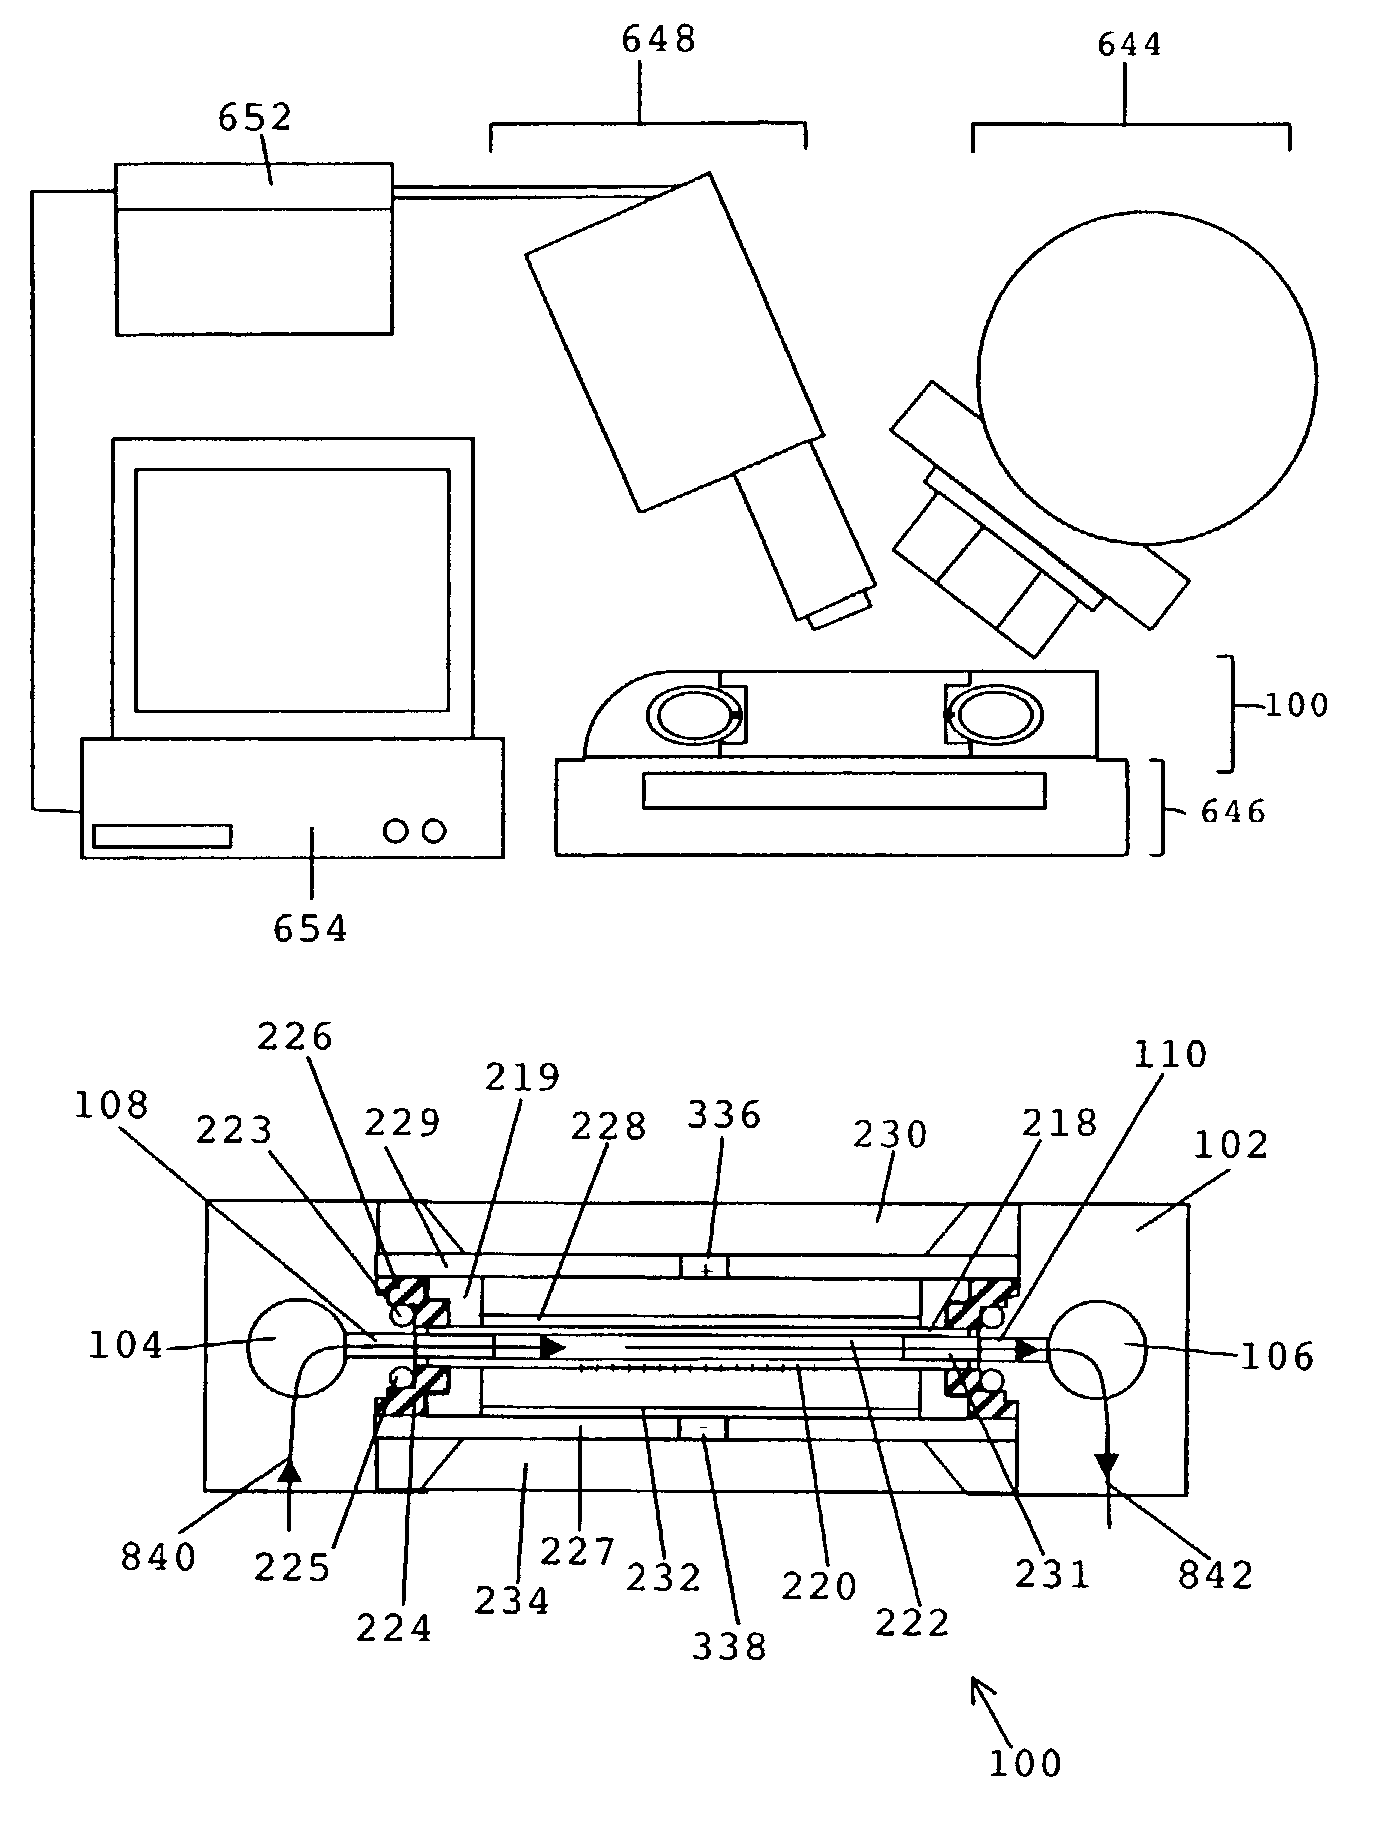 Ionic pre-concentration XRF identification and analysis device, system and method